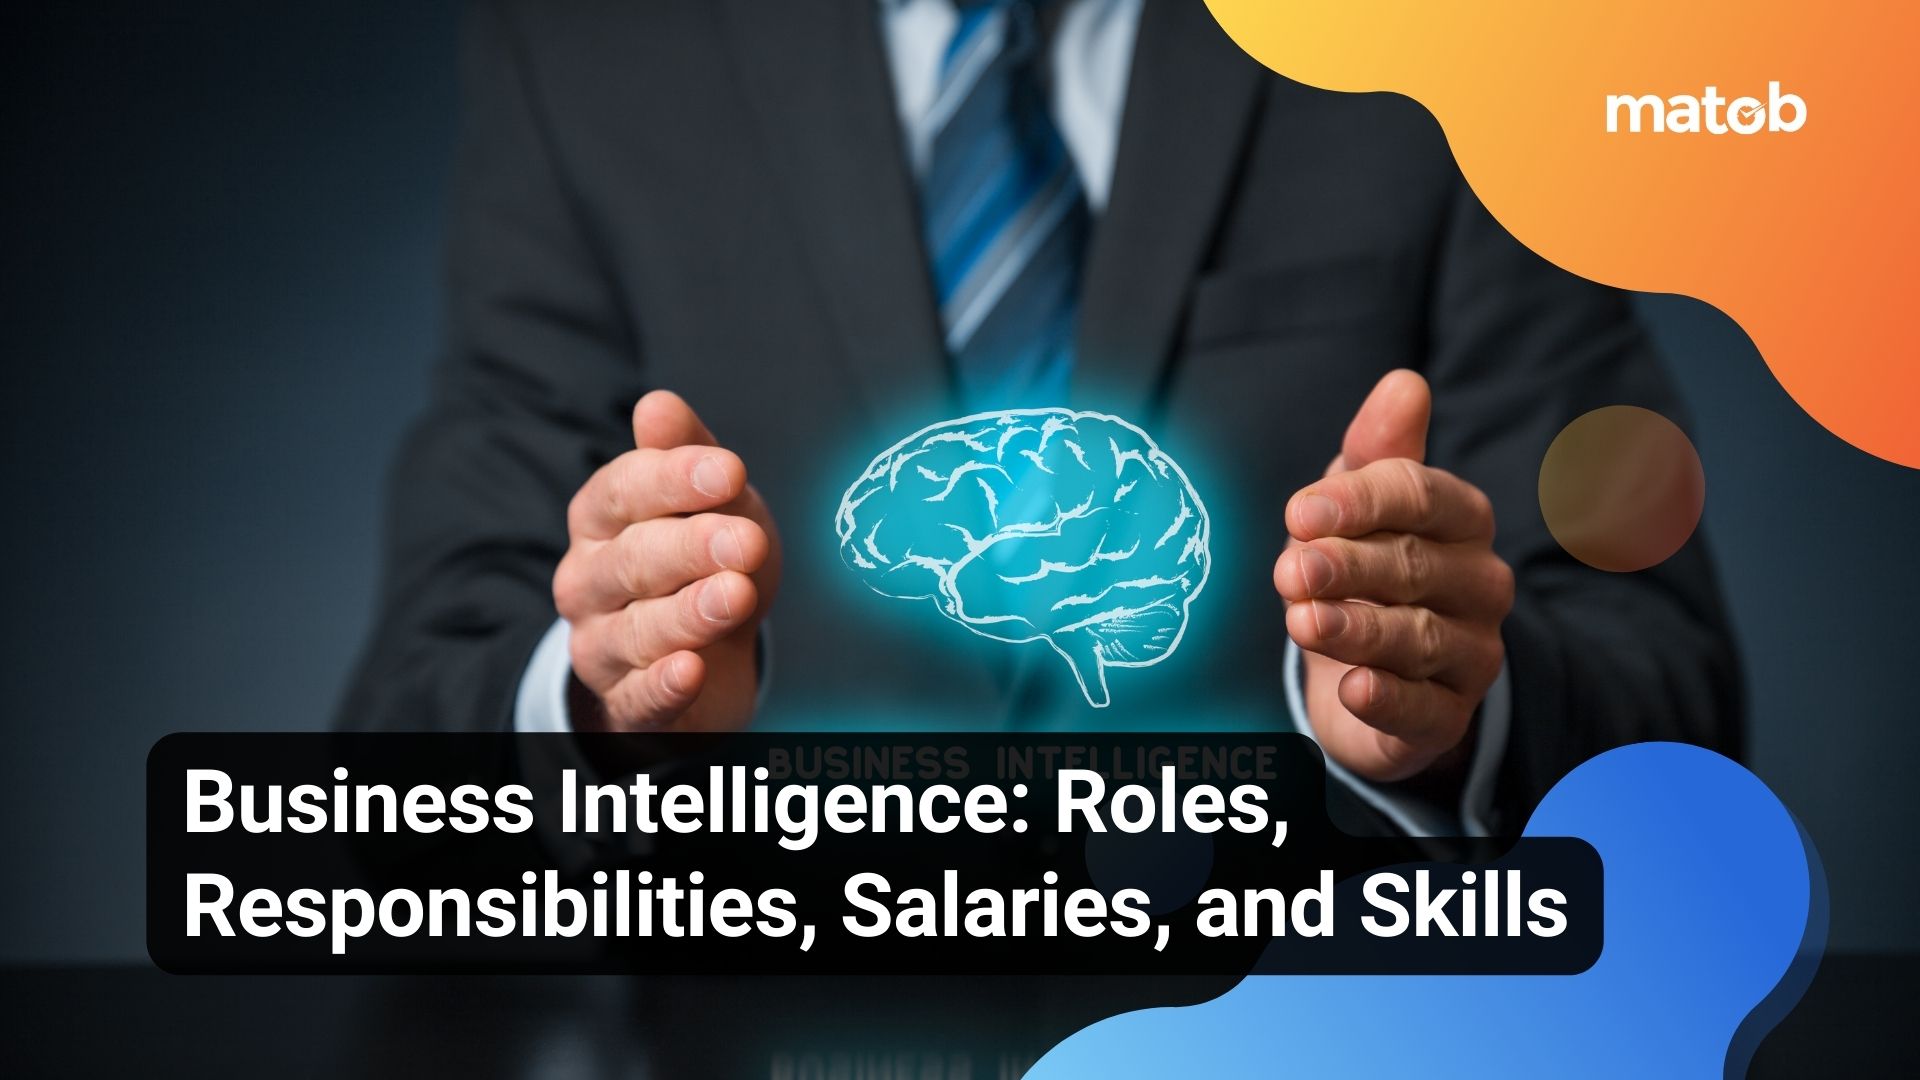 Business Intelligence: Roles, Responsibilities, Salaries, and Skills